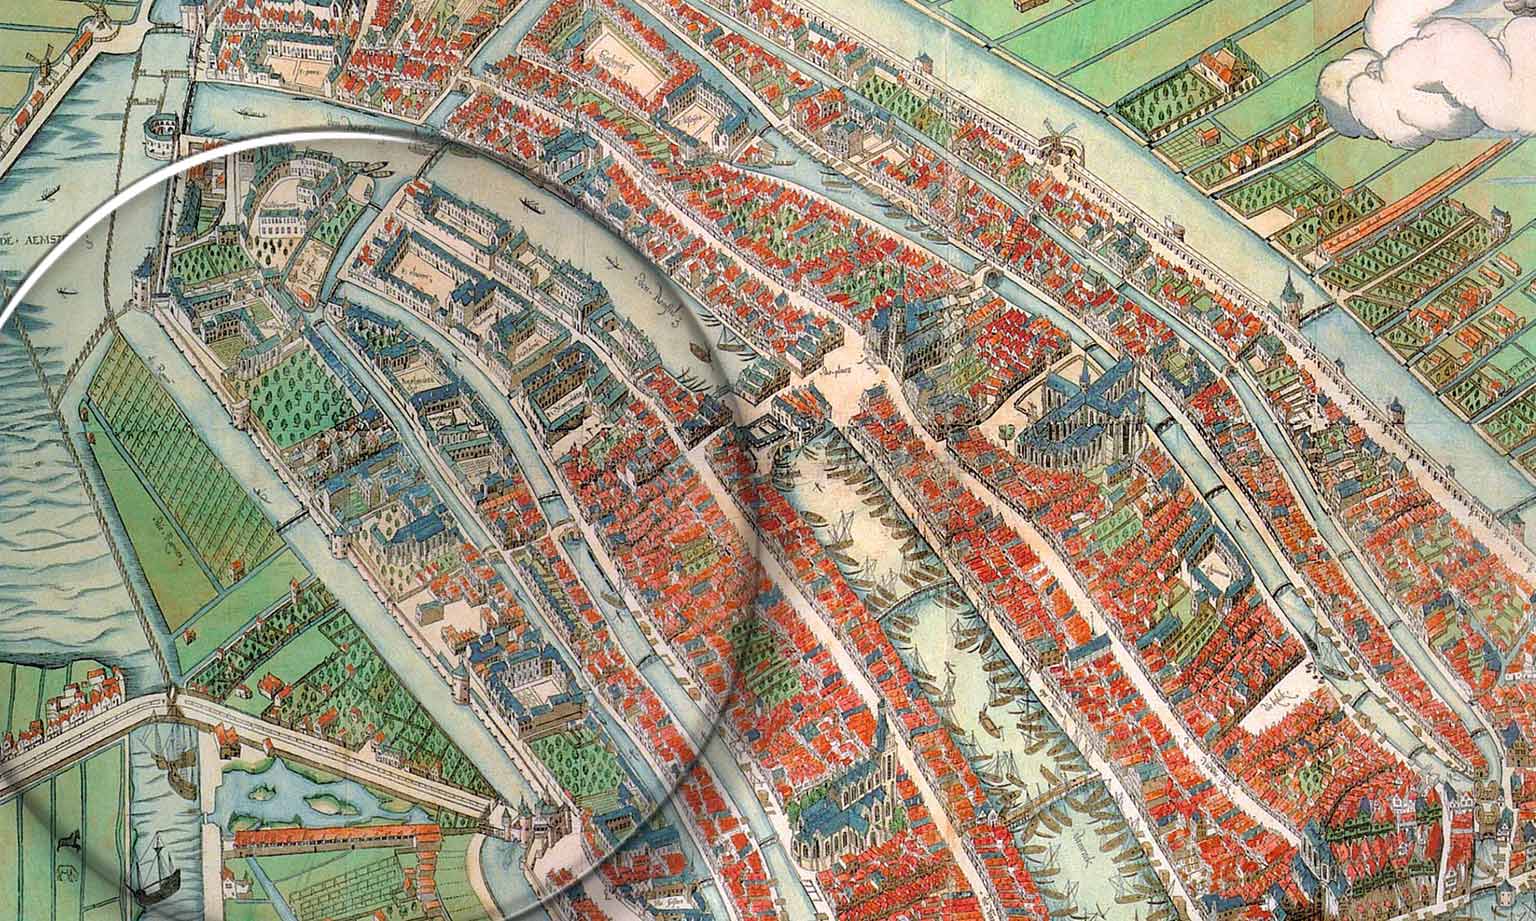 Kloveniersburgwal, Amsterdam, on a map from 1544 by Cornelis Anthonisz